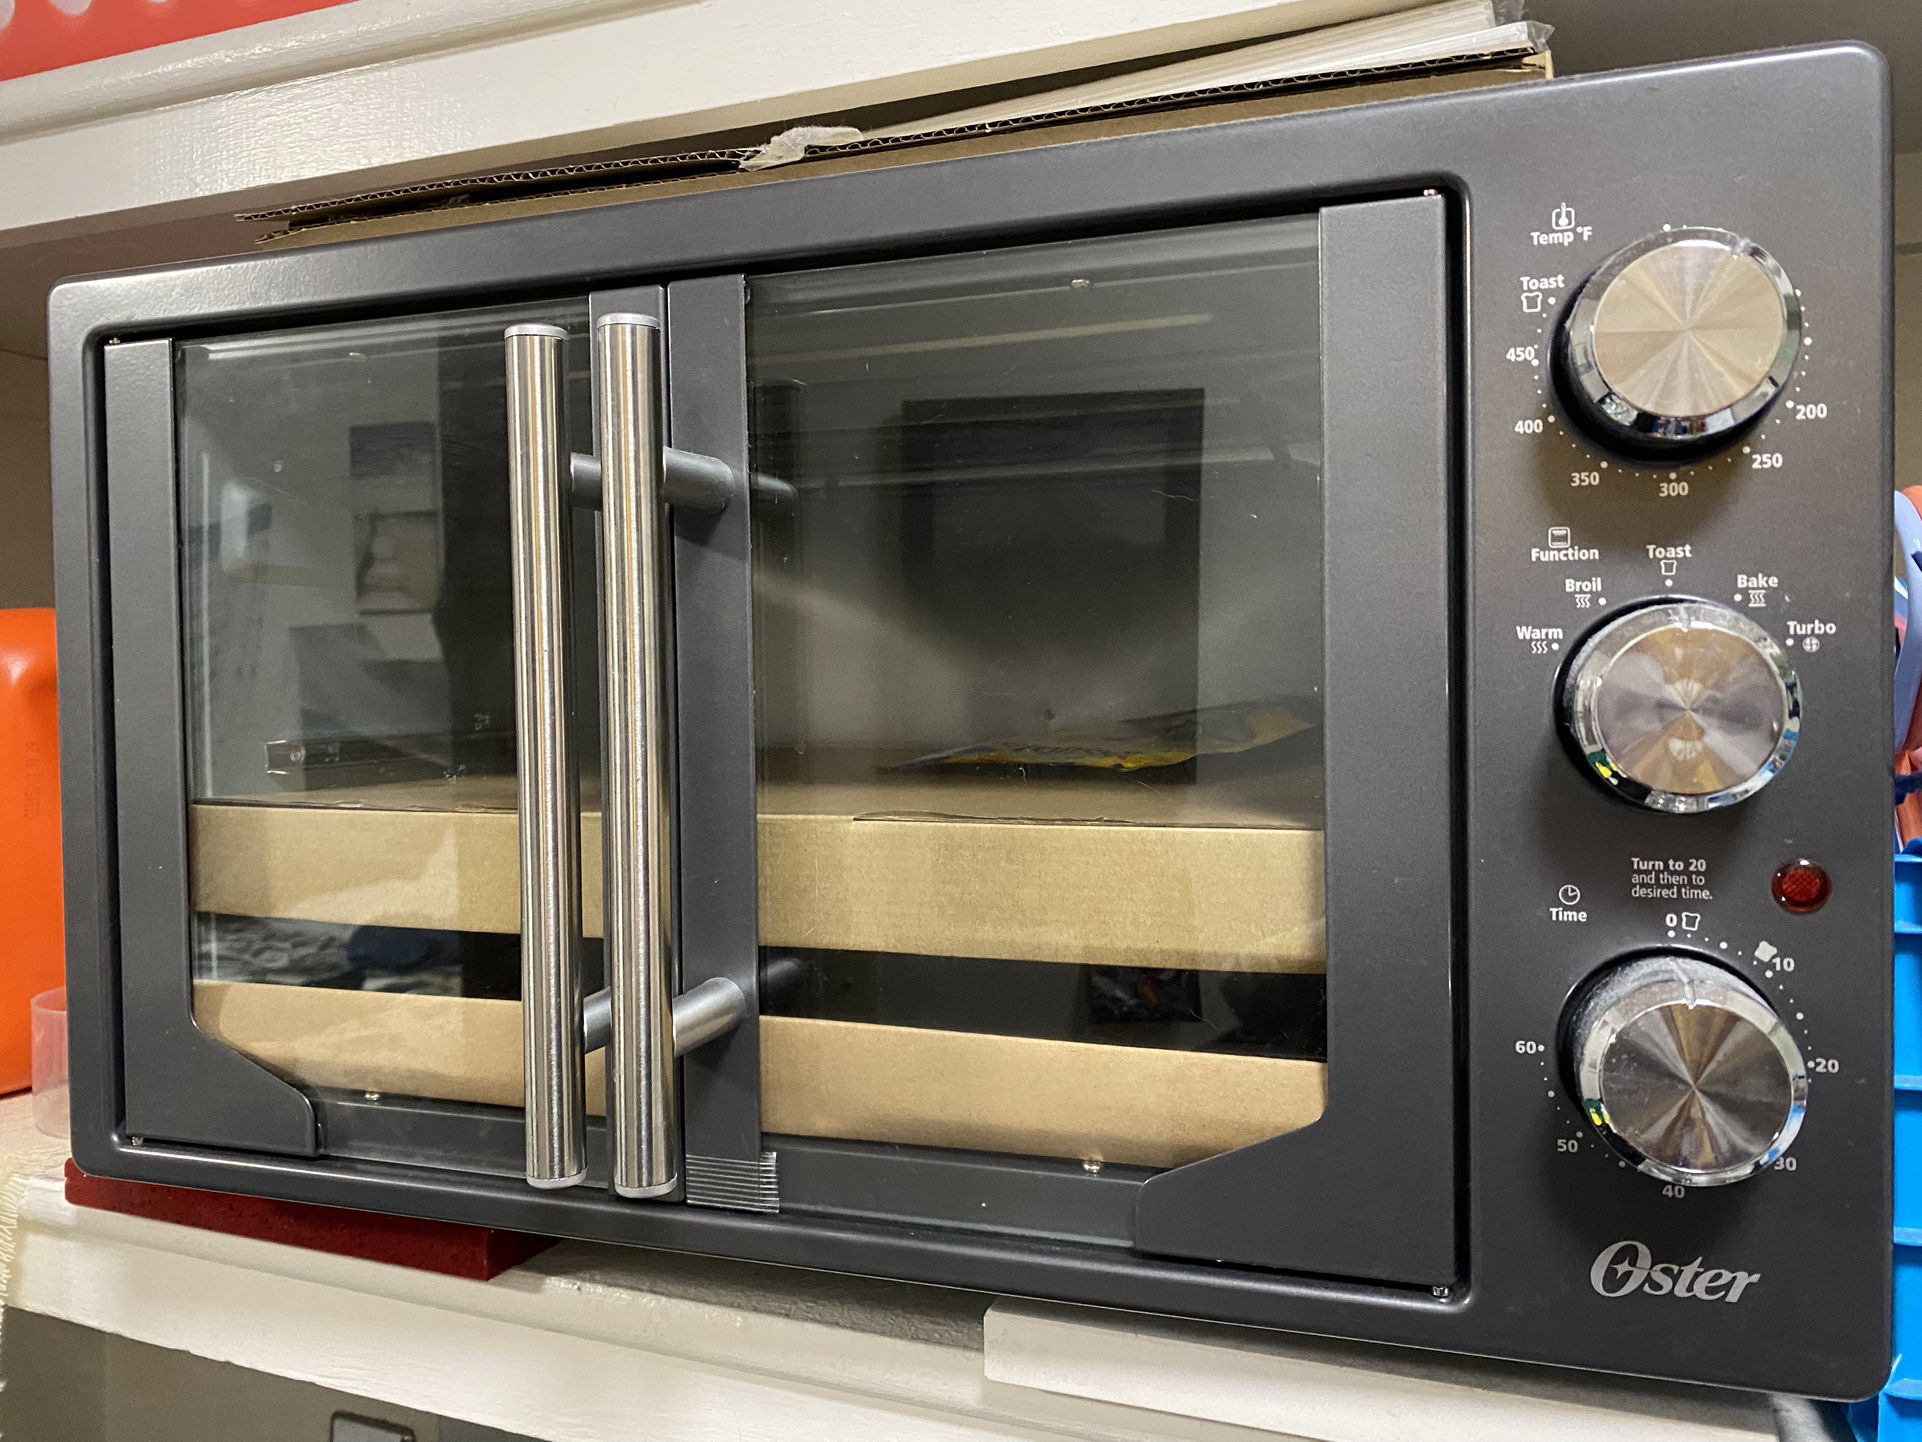 New Oster Convection Oven 